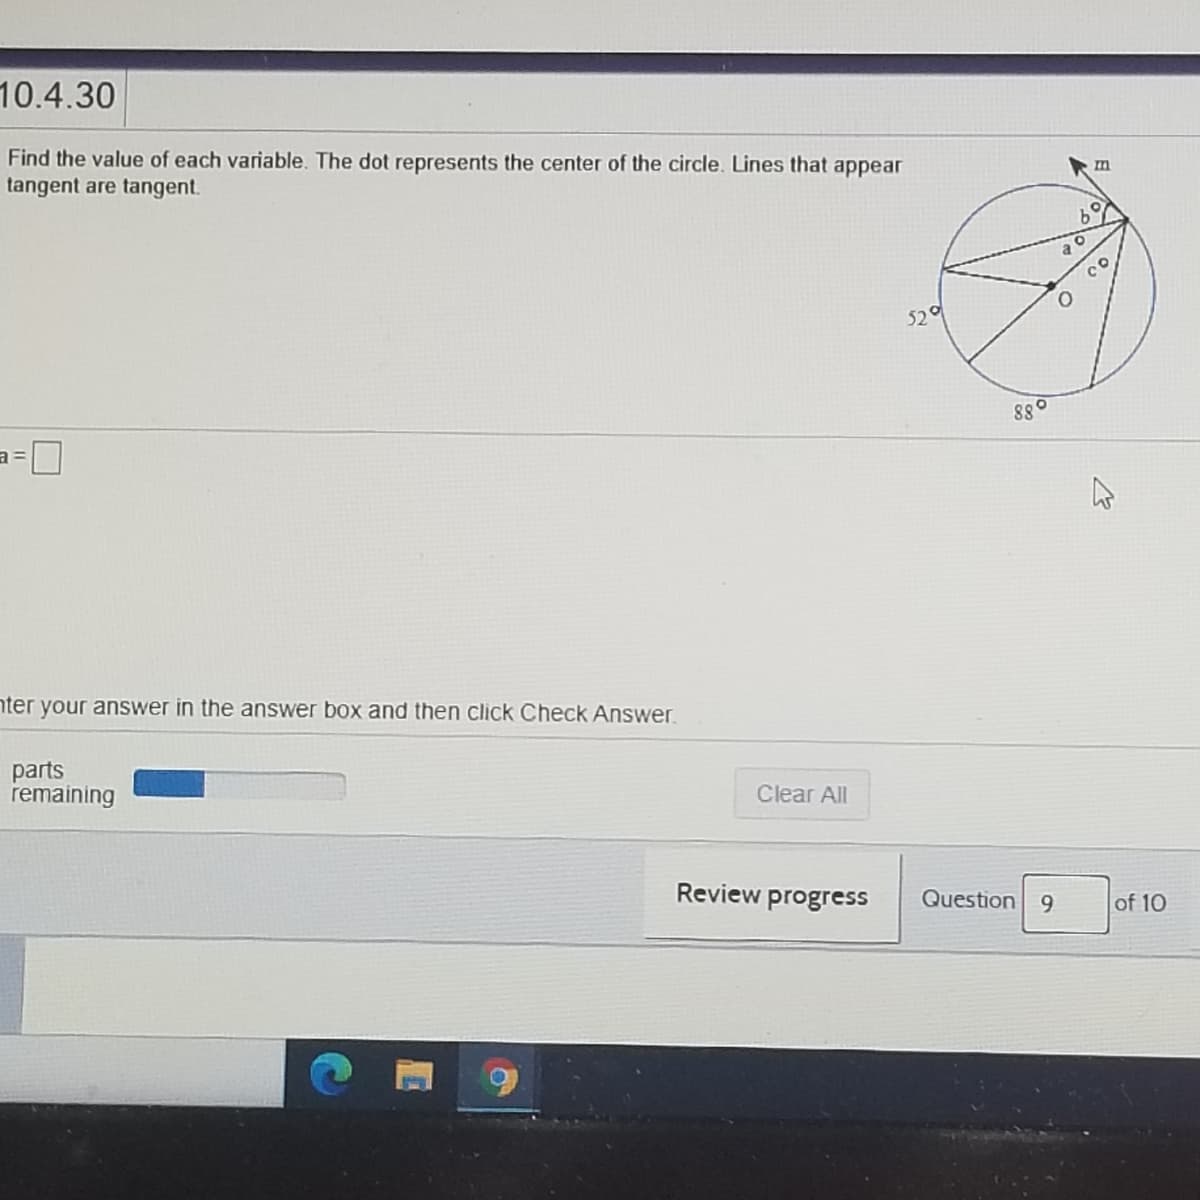 10.4.30
Find the value of each variable. The dot represents the center of the circle. Lines that appear
tangent are tangent.
520
880
nter your answer in the answer box and then click Check Answer.
parts
remaining
Clear All
Review progress
Question 9
of 10
